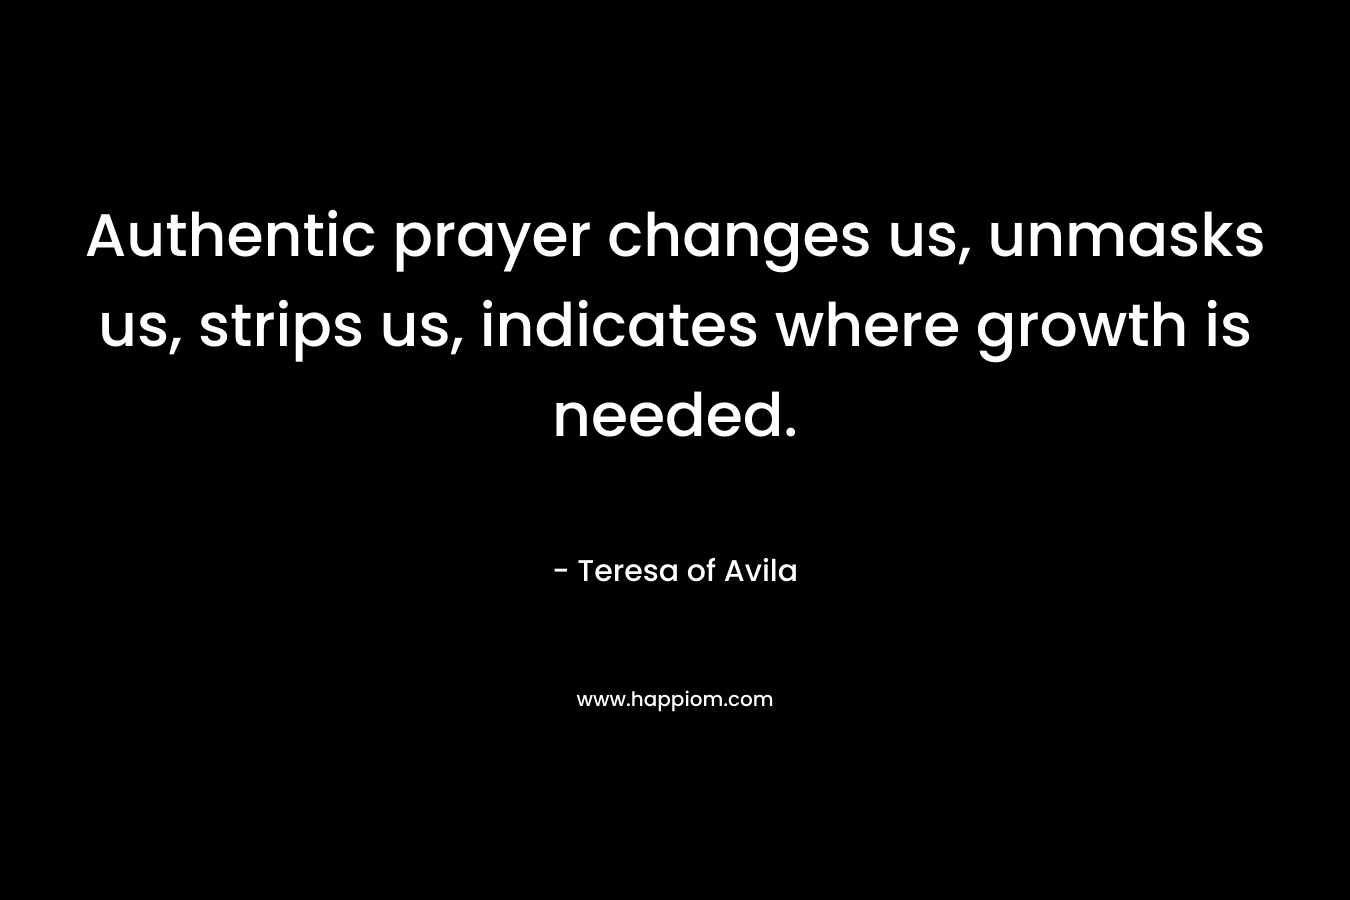 Authentic prayer changes us, unmasks us, strips us, indicates where growth is needed.